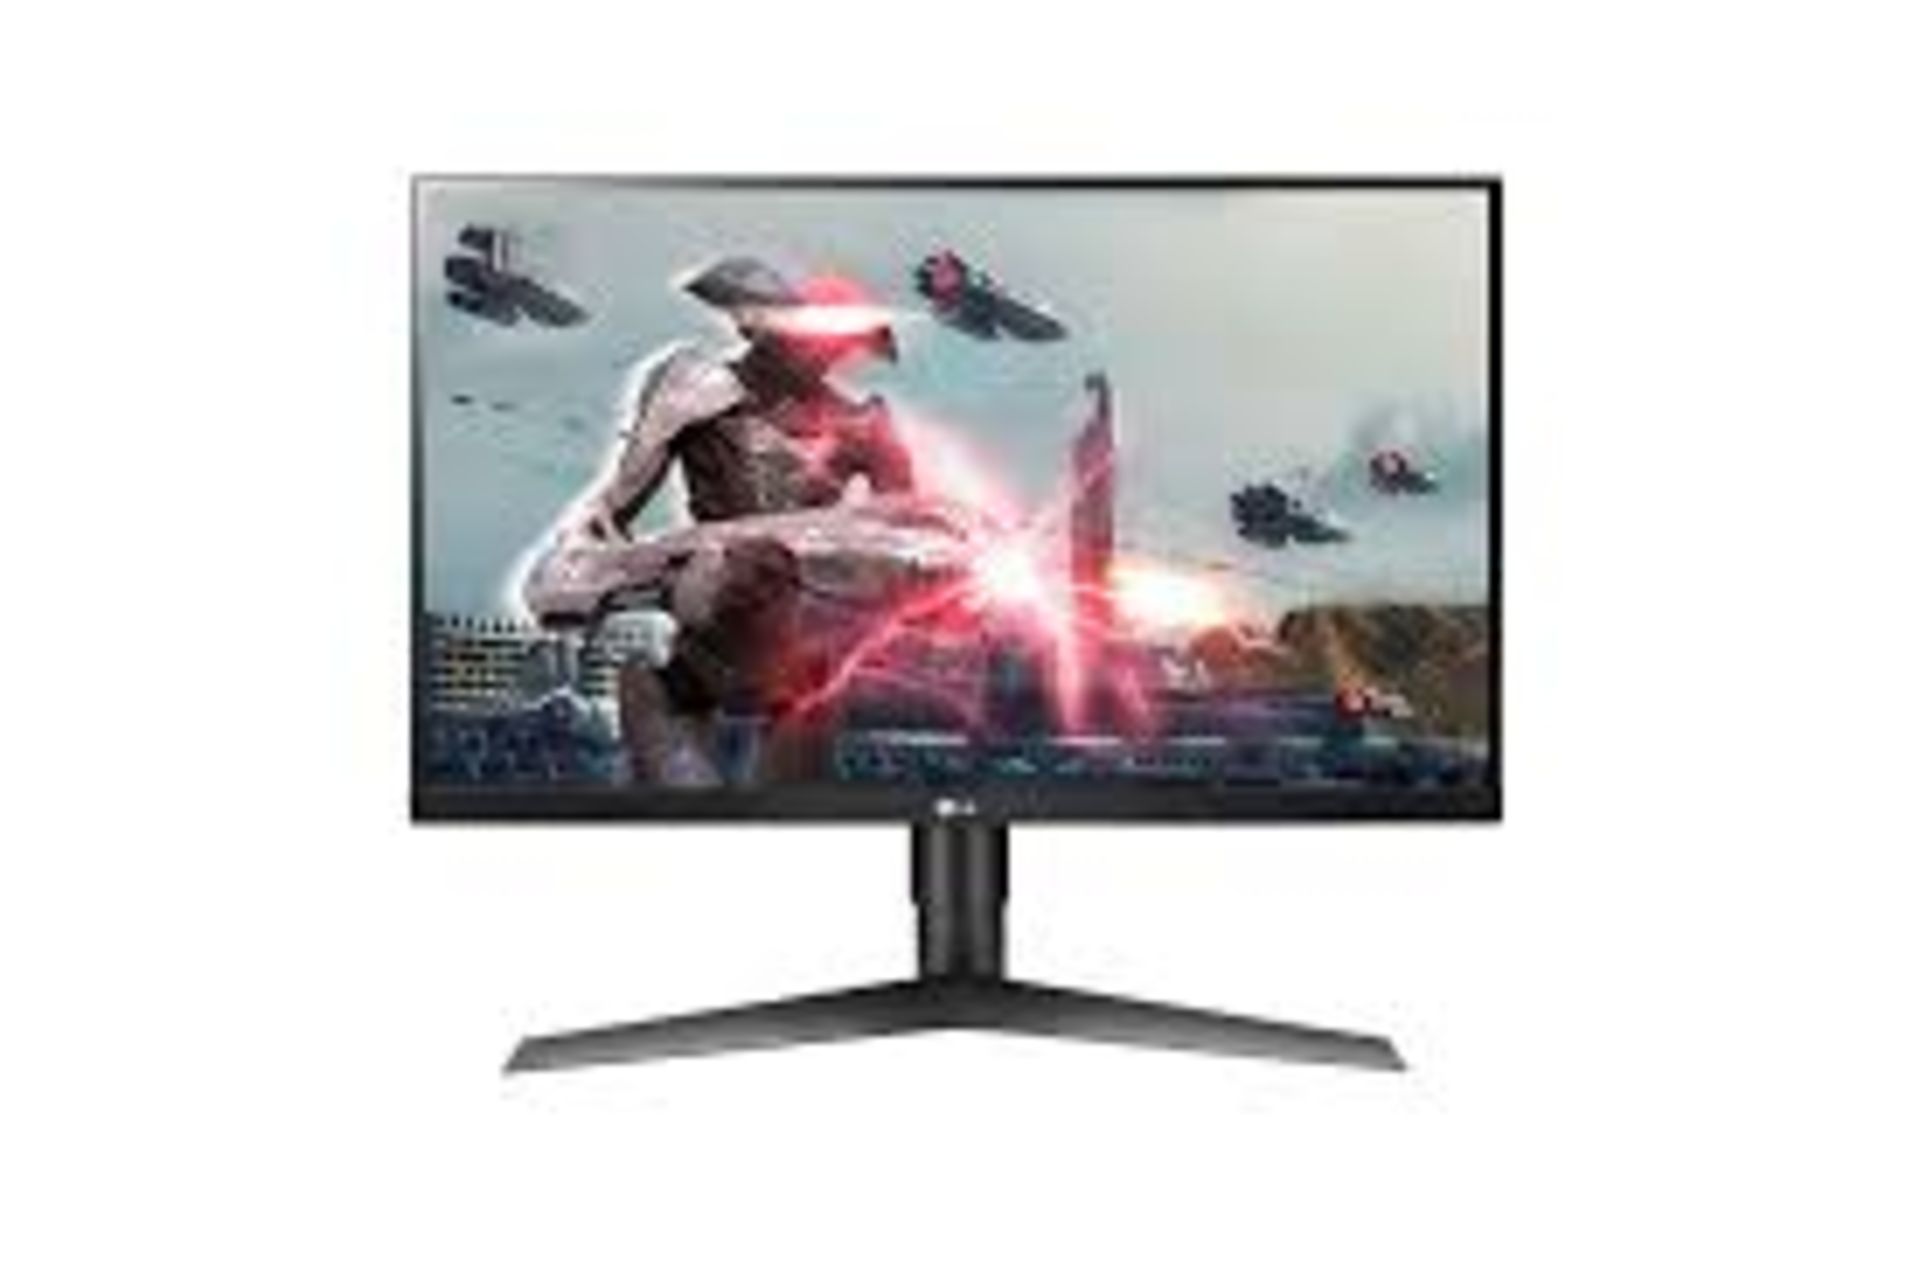 + VAT Grade A 27 Inch FULL HD IPS LED GAMING MINITOR WITH G-SYNC 144HZ REFRESH RATE - HDMI DISPLAY